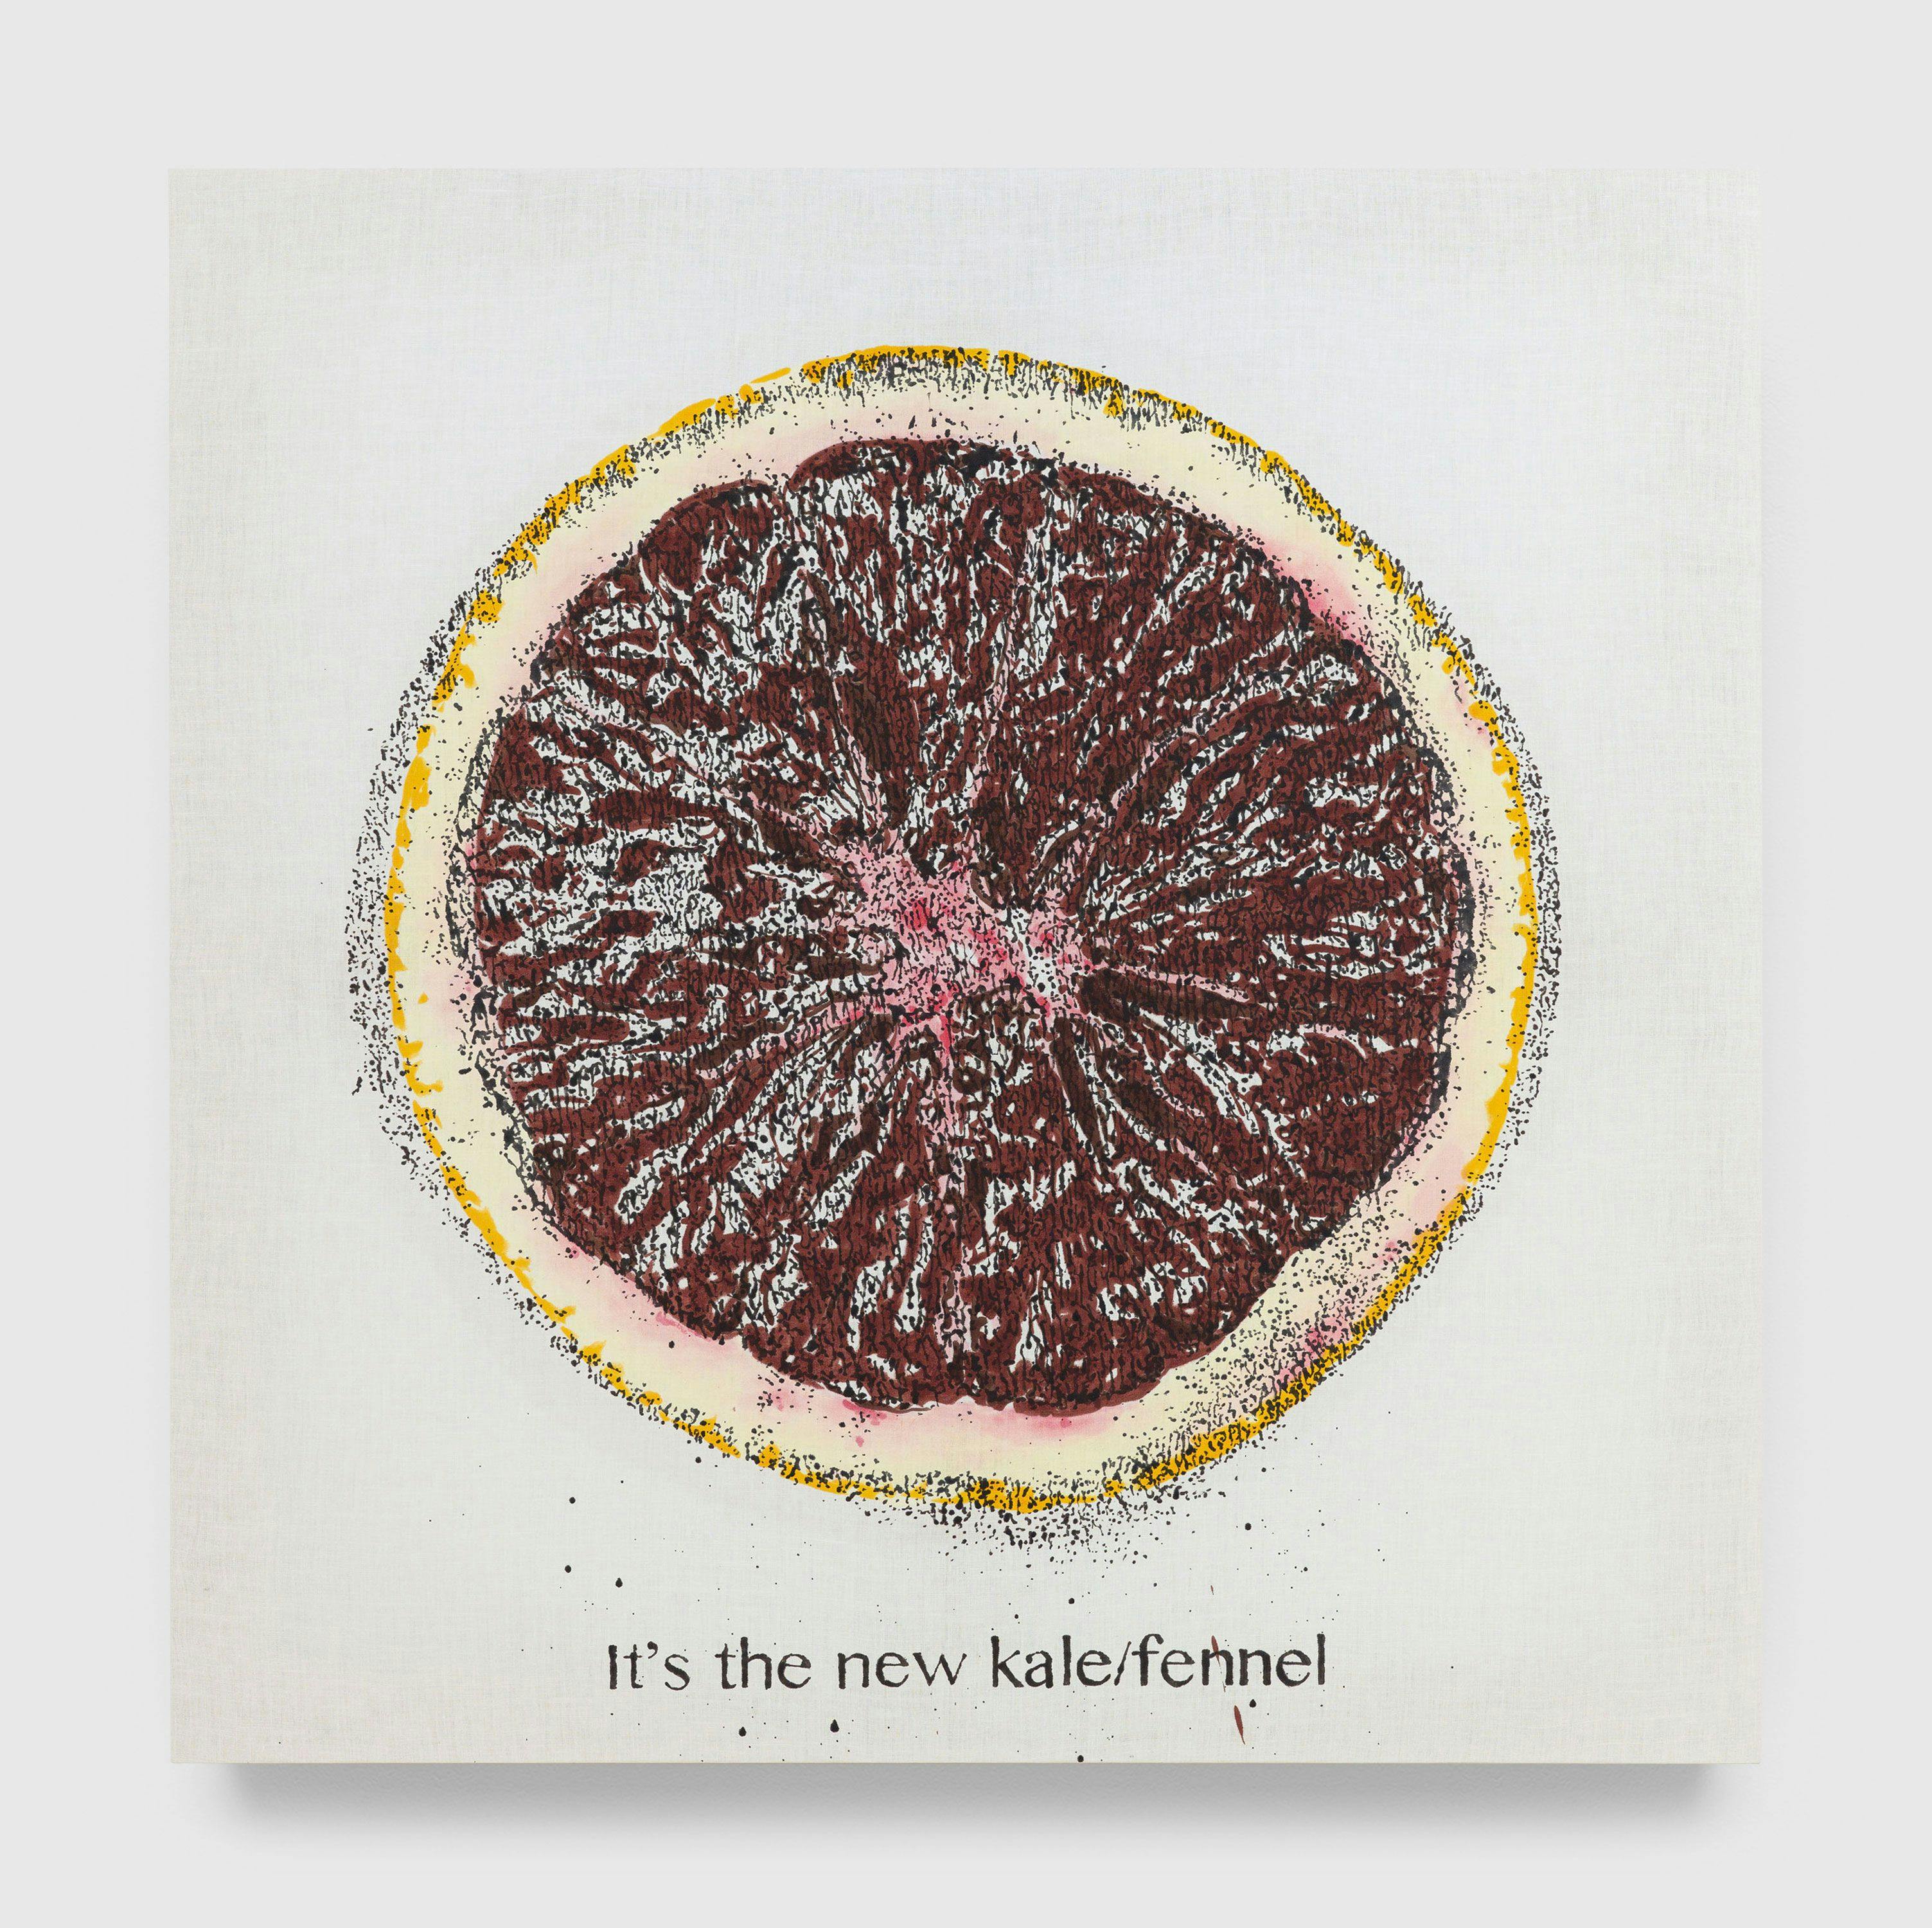 An oil and alkyd on linen artwork by Nate Lowman, titled Blood Orange Is The New Kale, dated 2013.